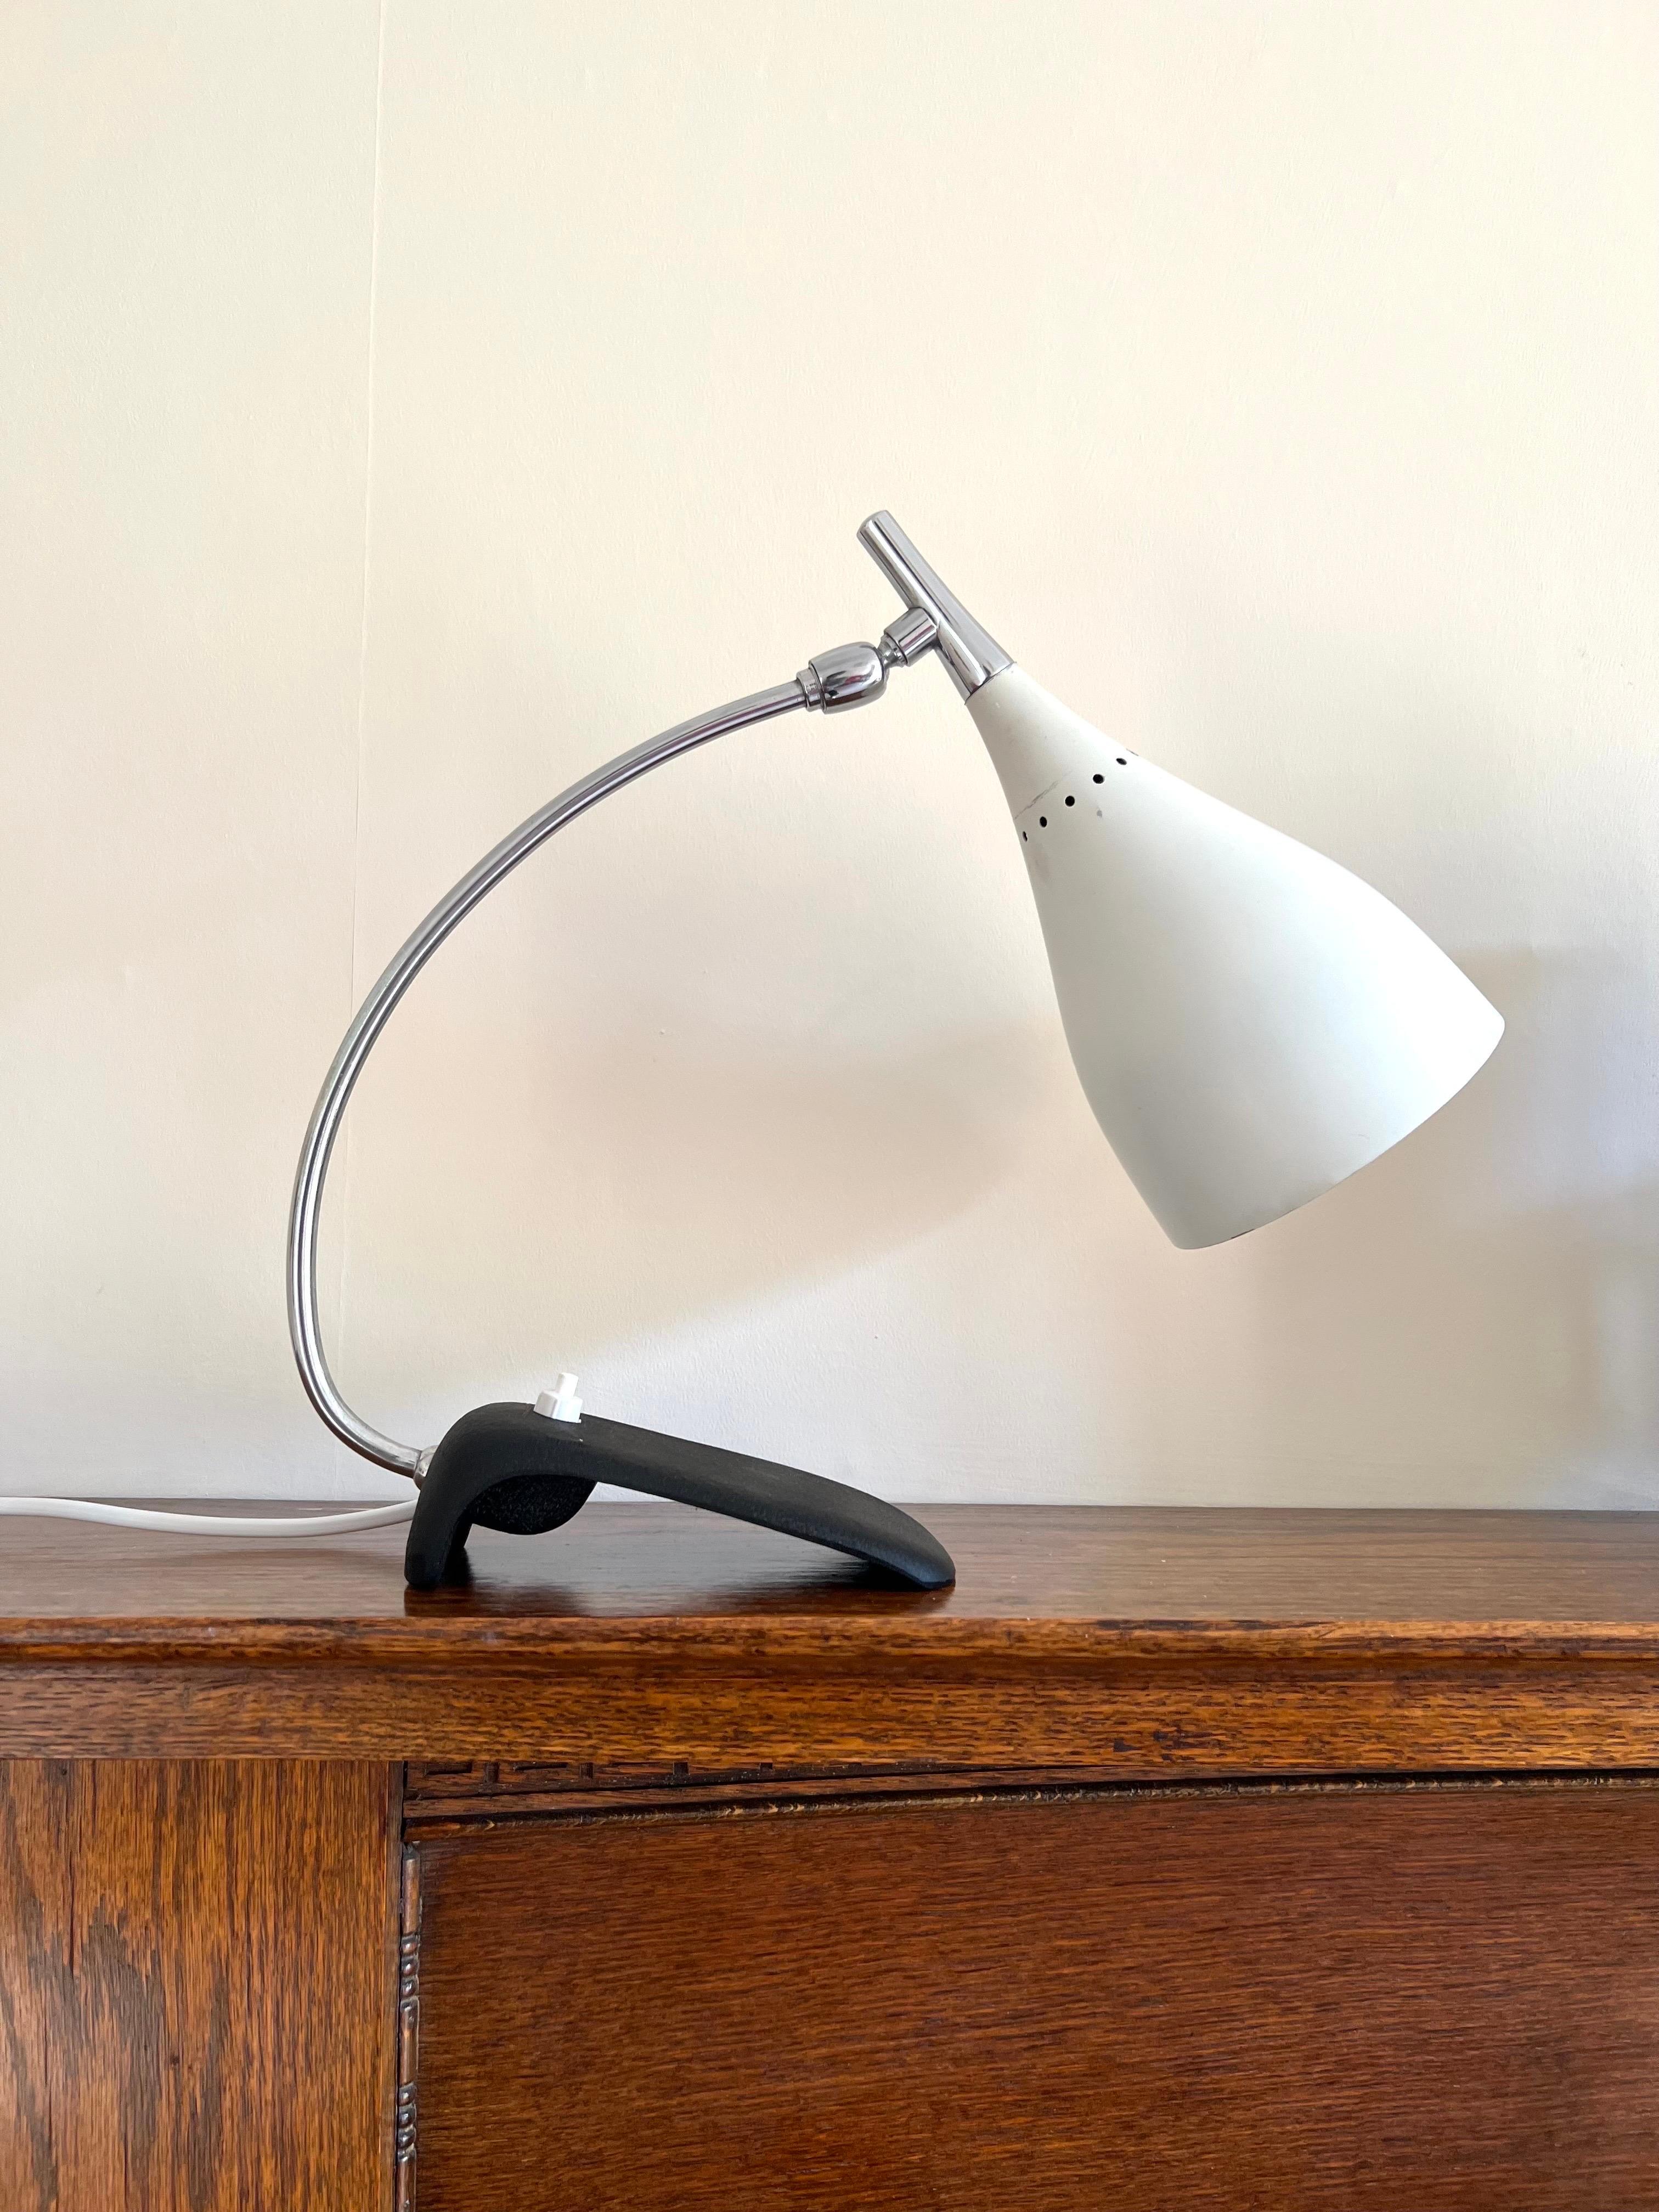 Mid Century Table Lamp by Louis Kalff for Gebrüder Cosack.


Table Lamp Attributed to Louis Kalff for Gebrüder Cosack, Produced in the 1950’s.


An adjustable lacquered white aluminium lampshade, a ball jointed neck with a round metal arm, mounted